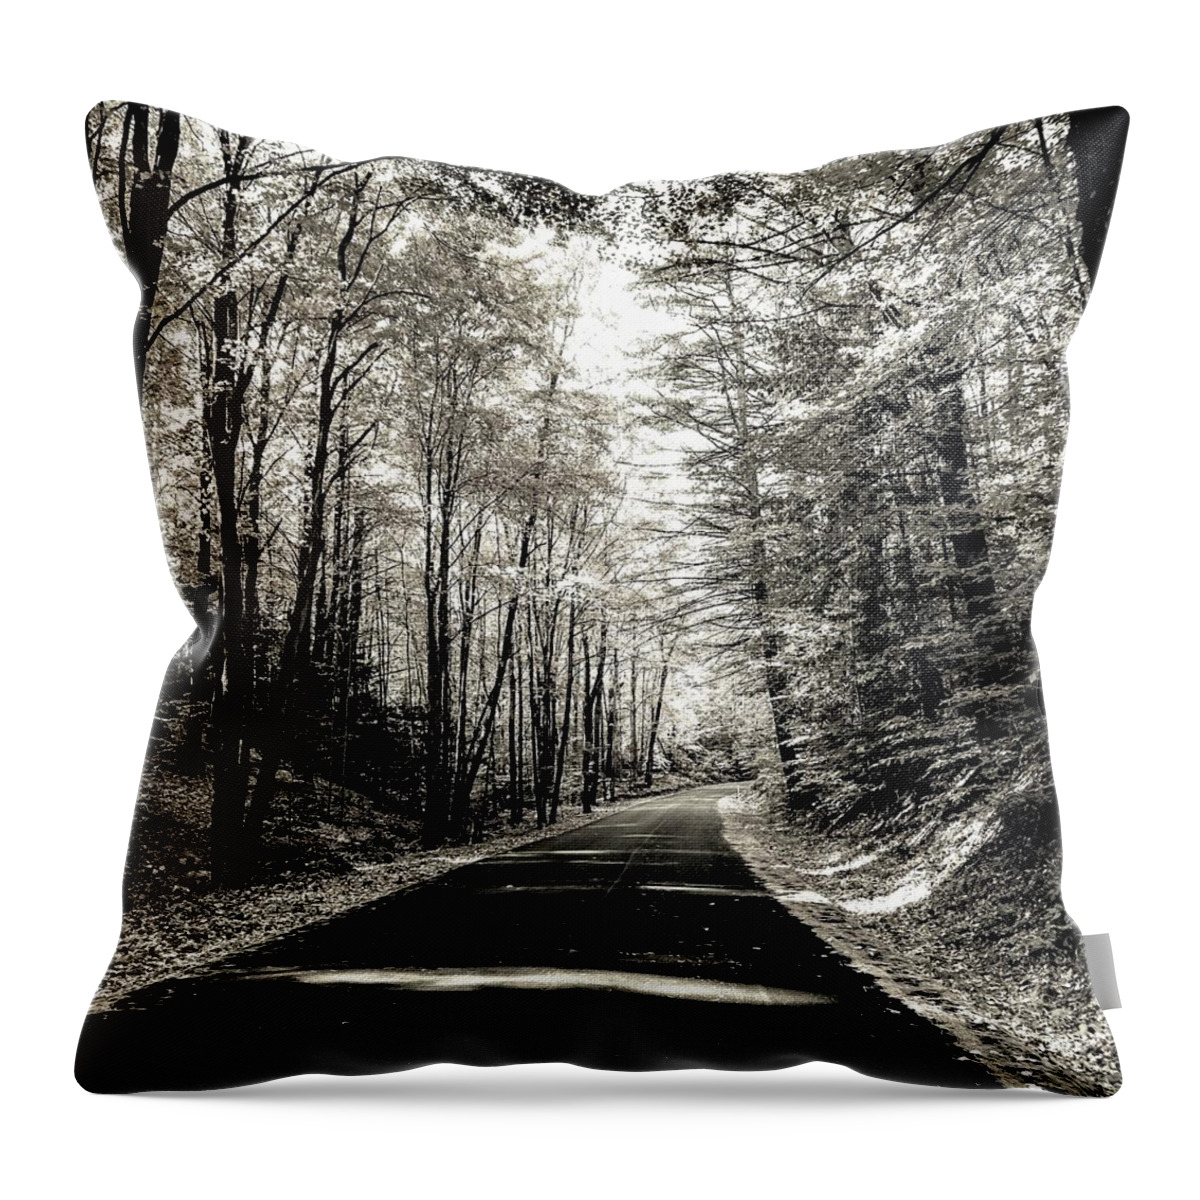  Throw Pillow featuring the photograph October Grayscale by Kendall McKernon